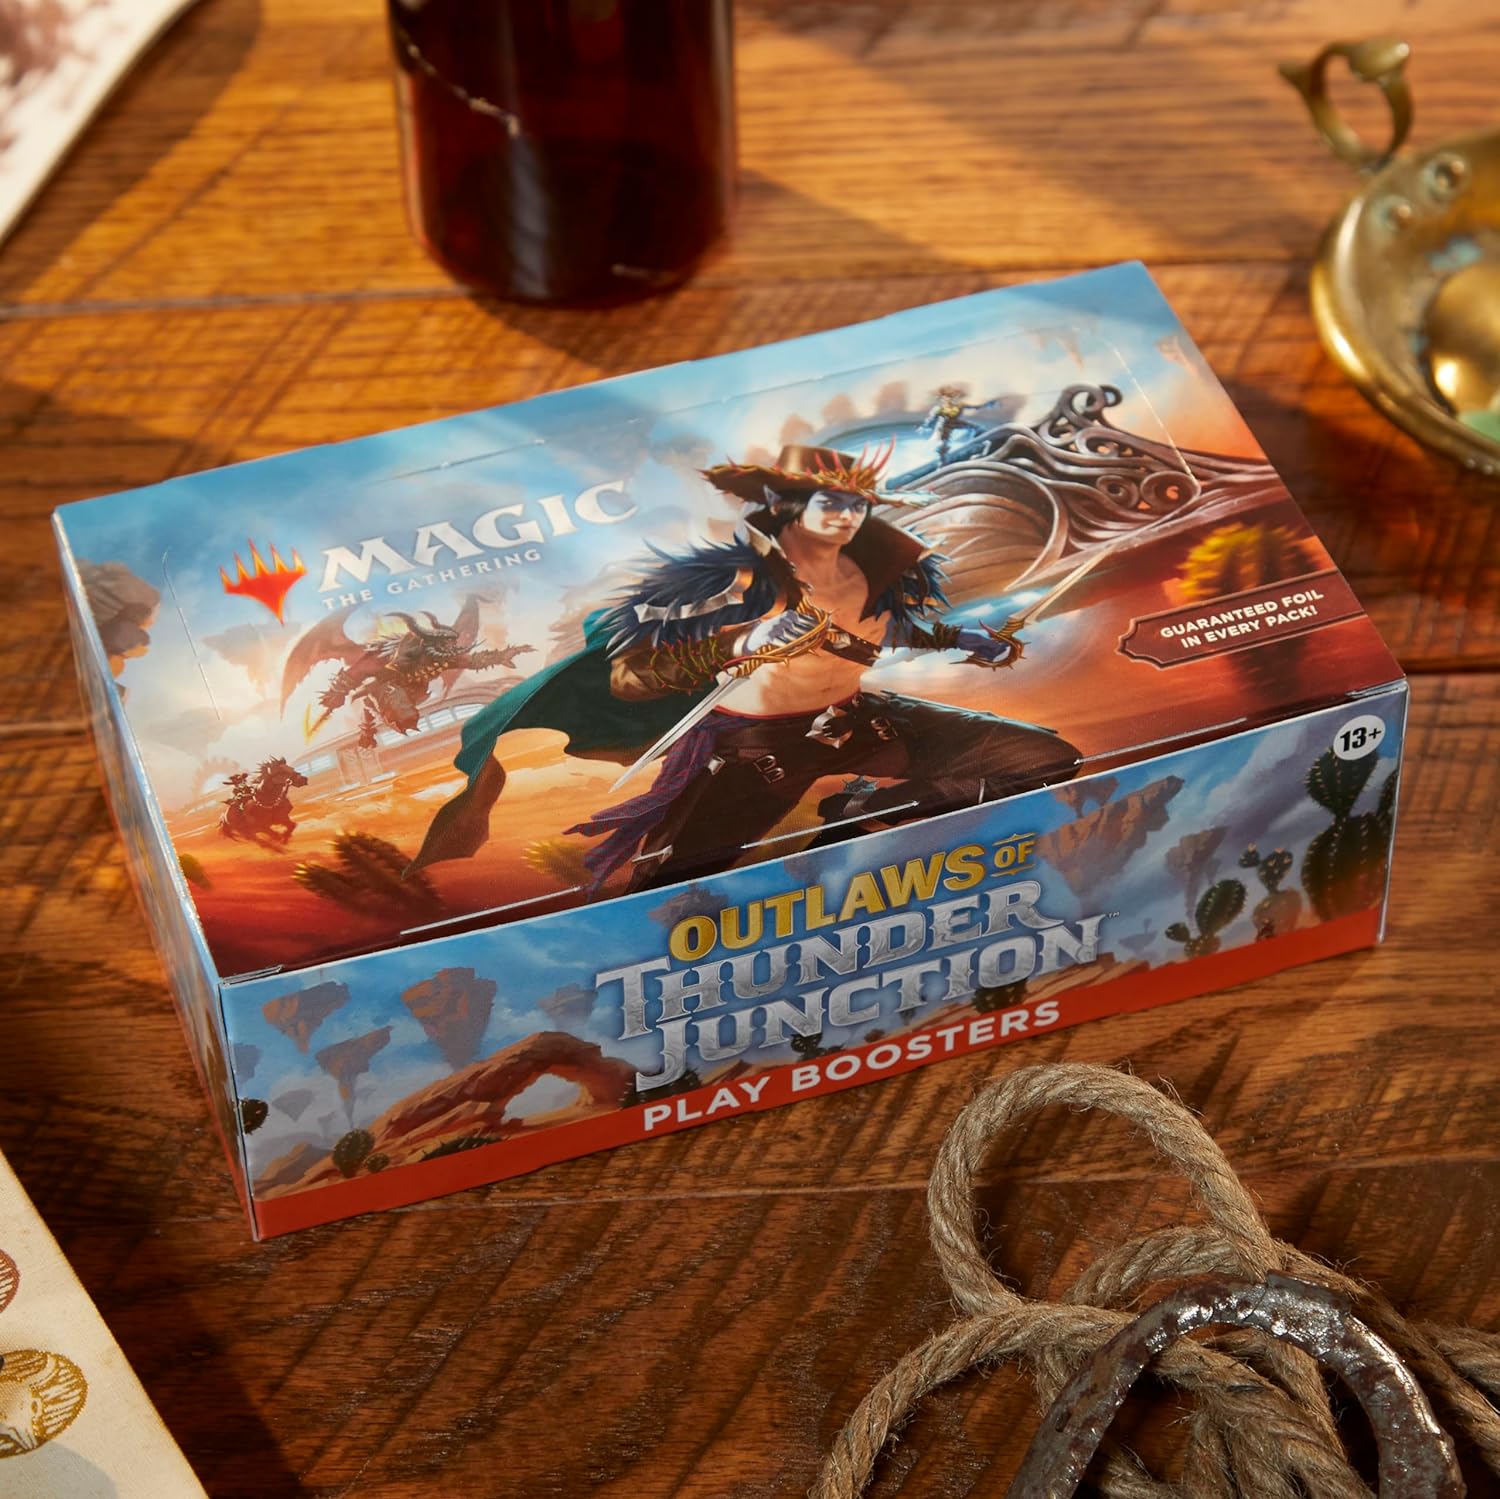 Magic the Gathering: Outlaws of Thunder Junction - Play Booster Box & Packs